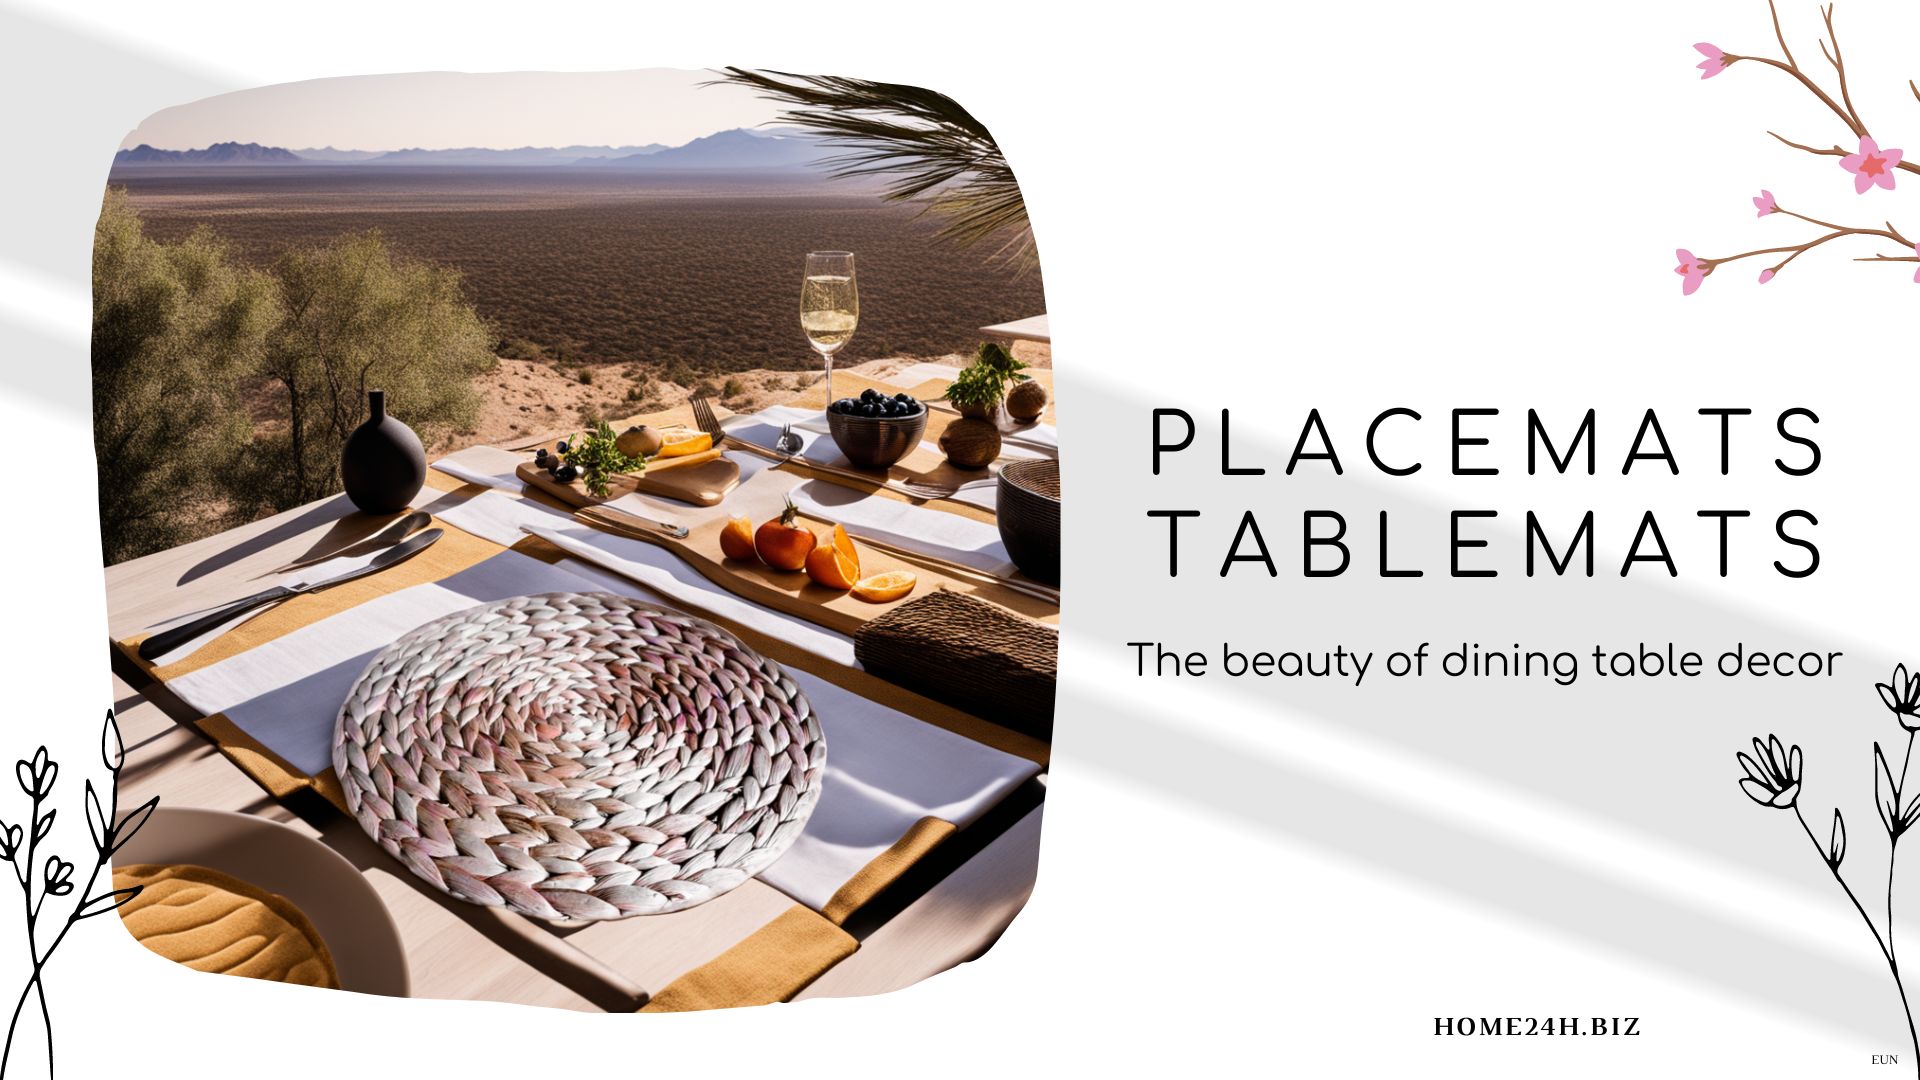 Placemats, Tablemats Natural Material Mats Are The Beauty Of Dining Table Decor.